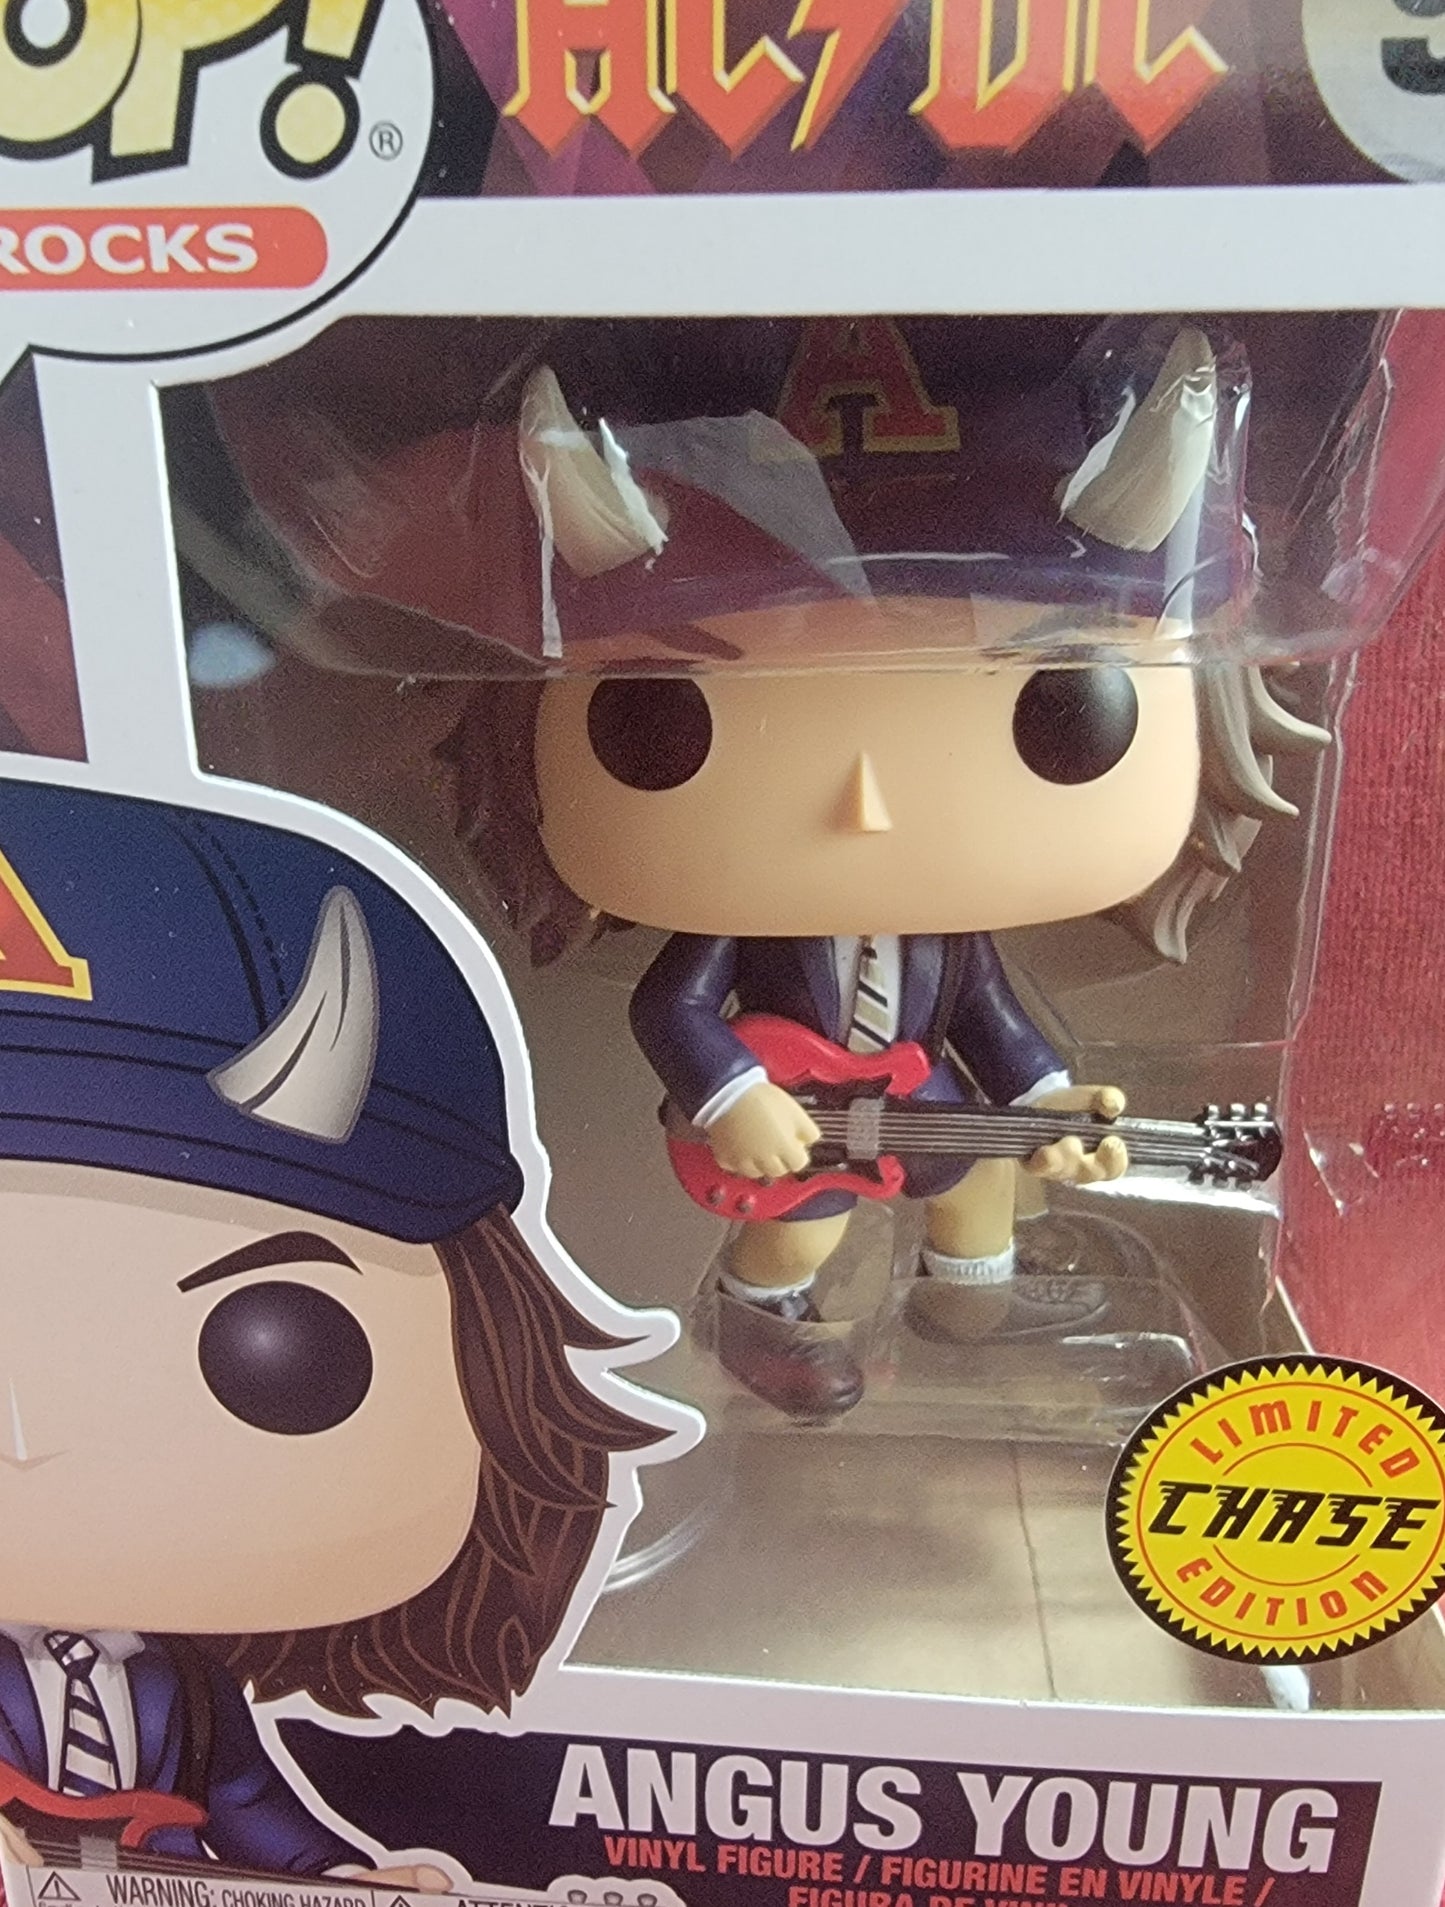 Angus Young Chase funko # 91 (nib)
With pop protector